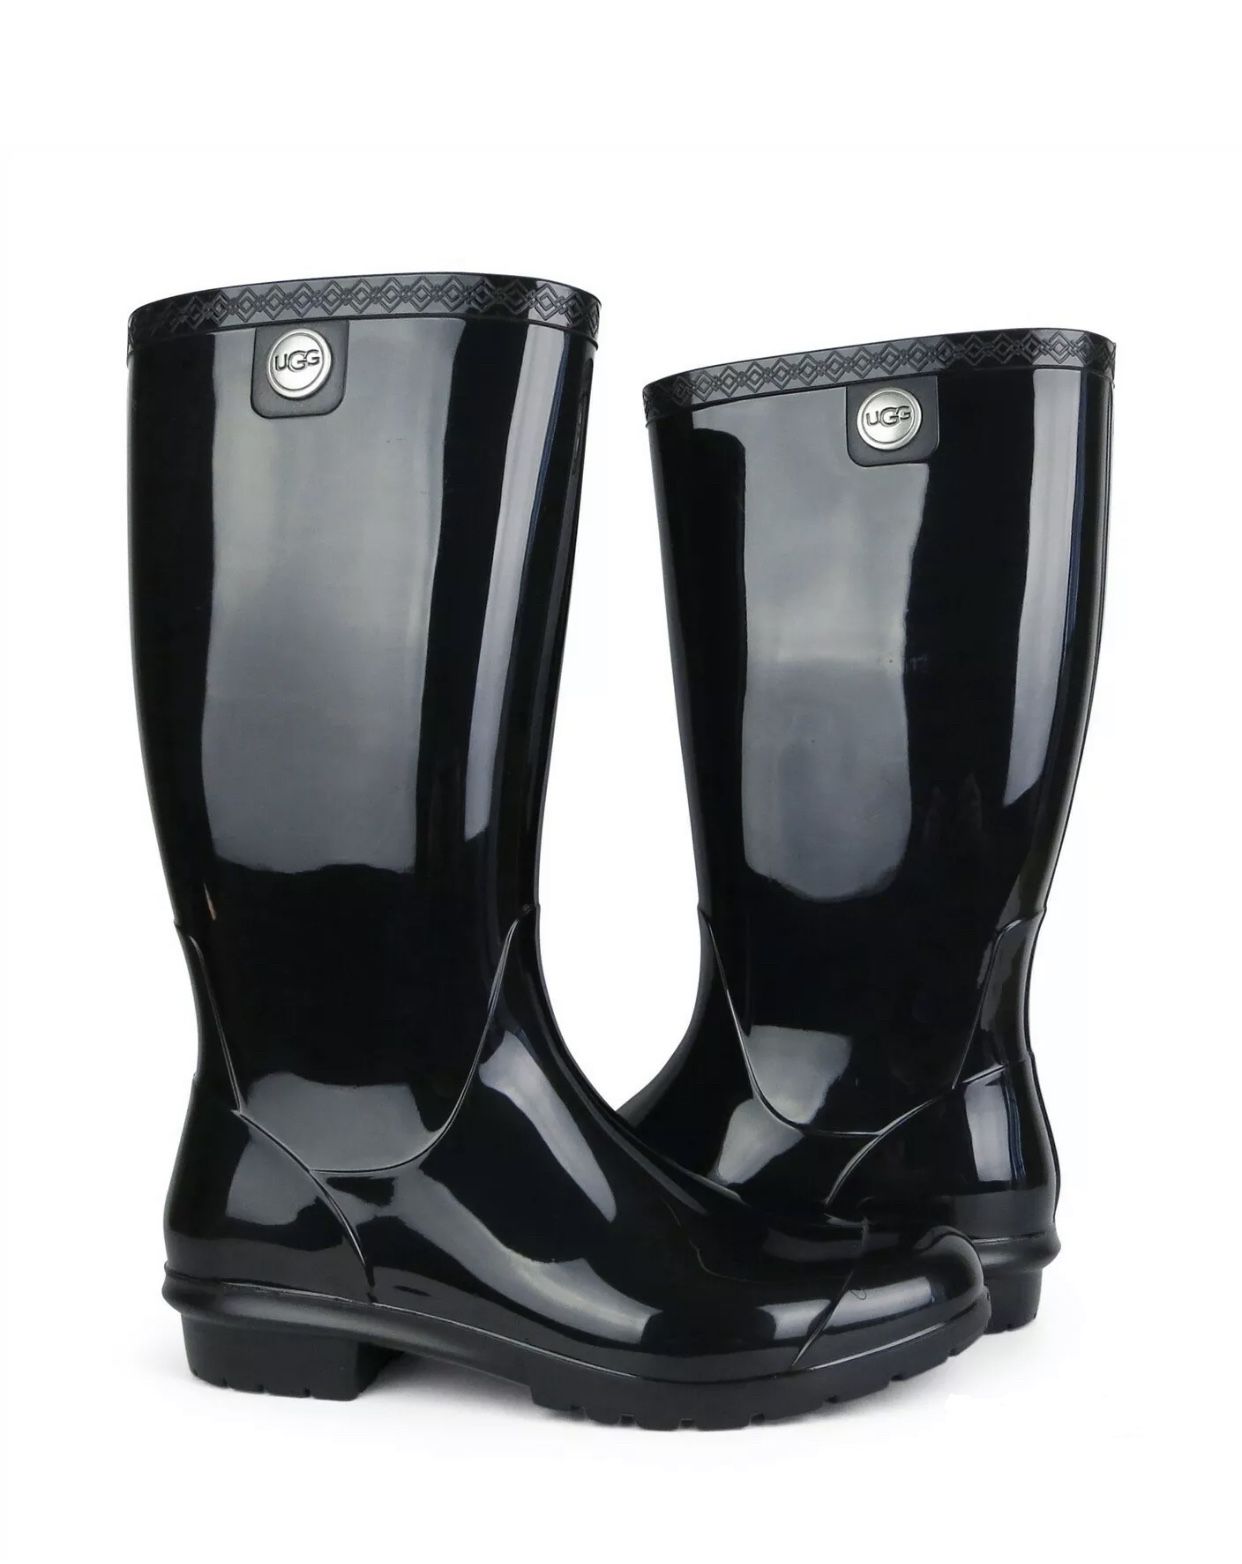 Ugg Tall Black Rain Boots Diferent Sizes Available 